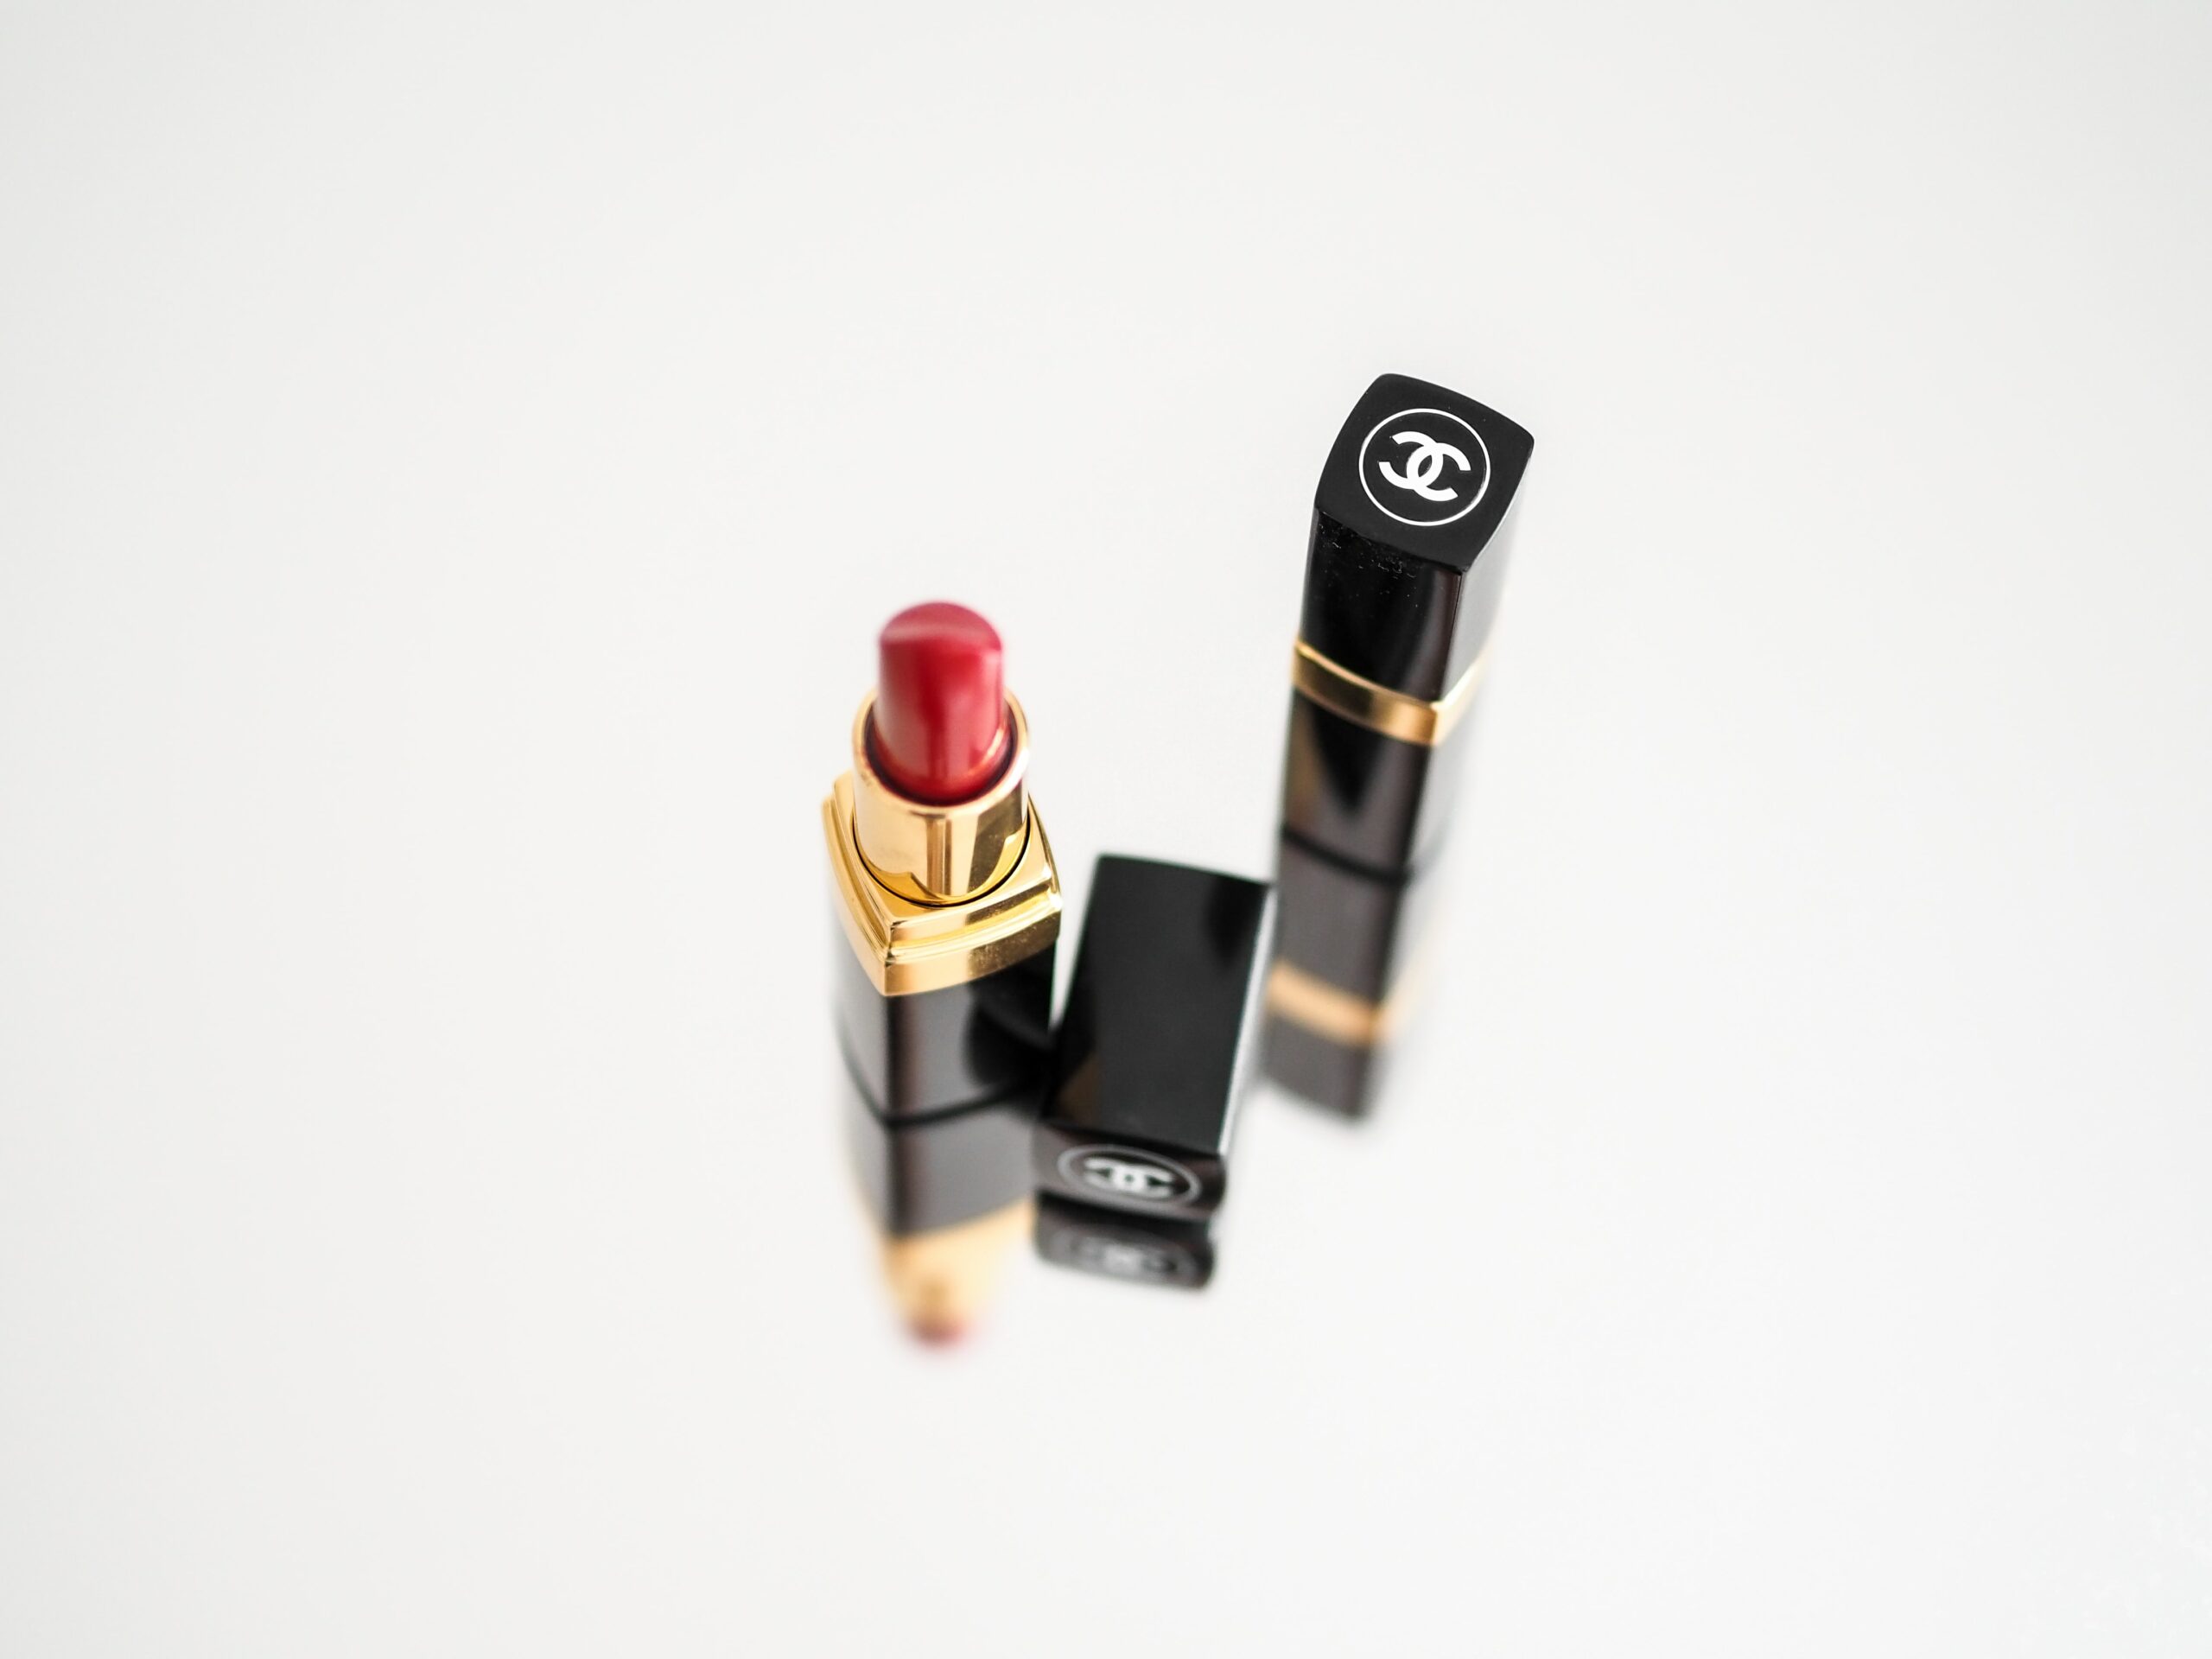 10 Best Lipstick Brands to Try in 2022